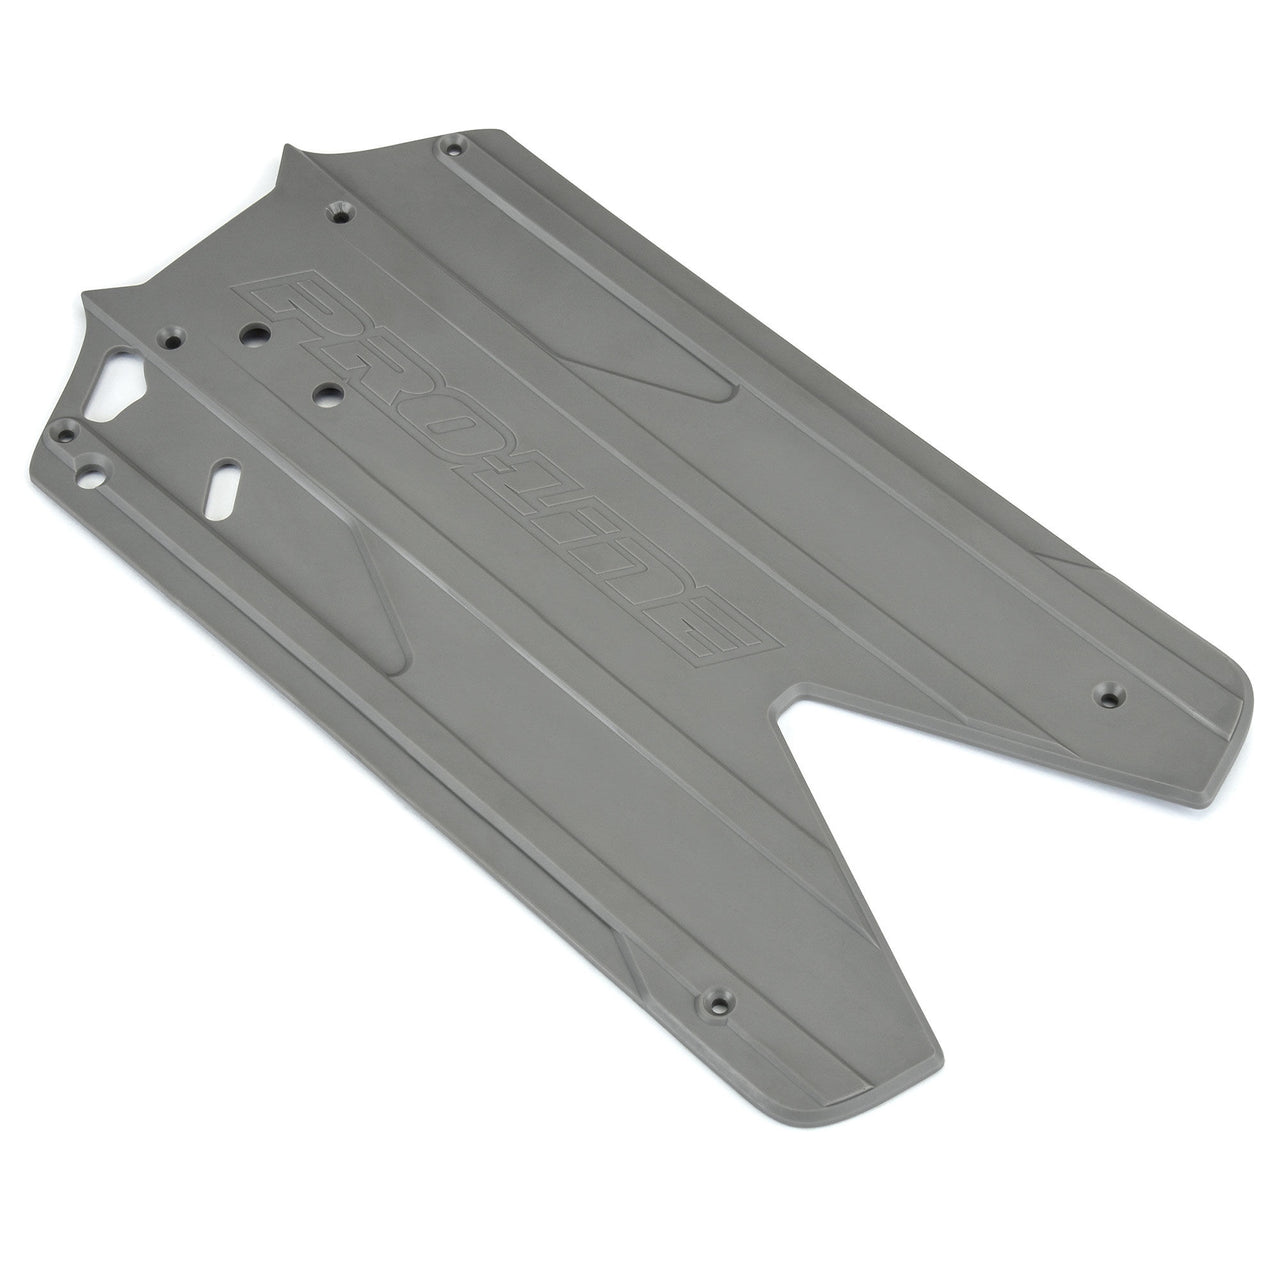 PRO639705 Bash Armor Chassis Protector (Stone Gray) for ARRMA 3S Long WB